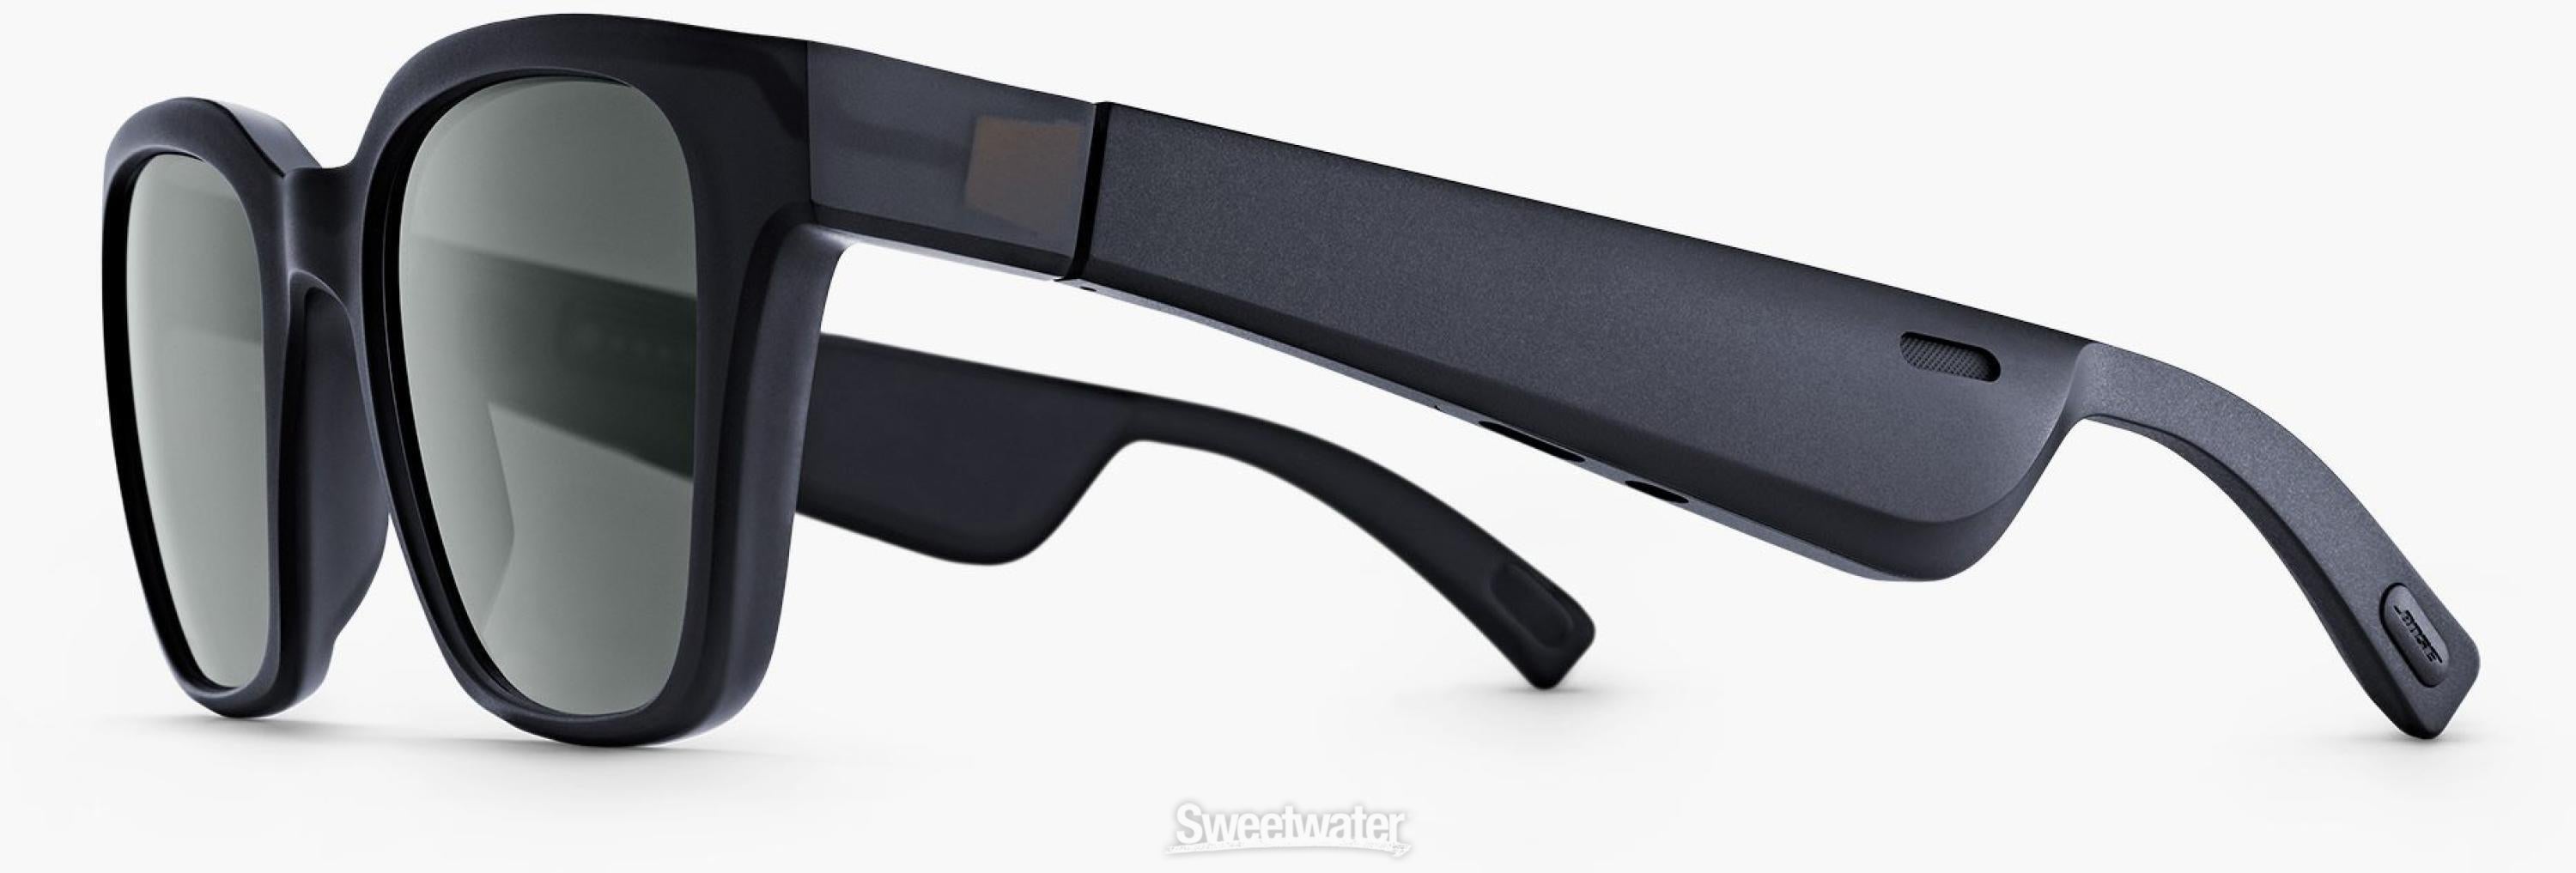 Bose launches three new Frames sunglasses with built-in speakers, more |  Ranga Shopping Center